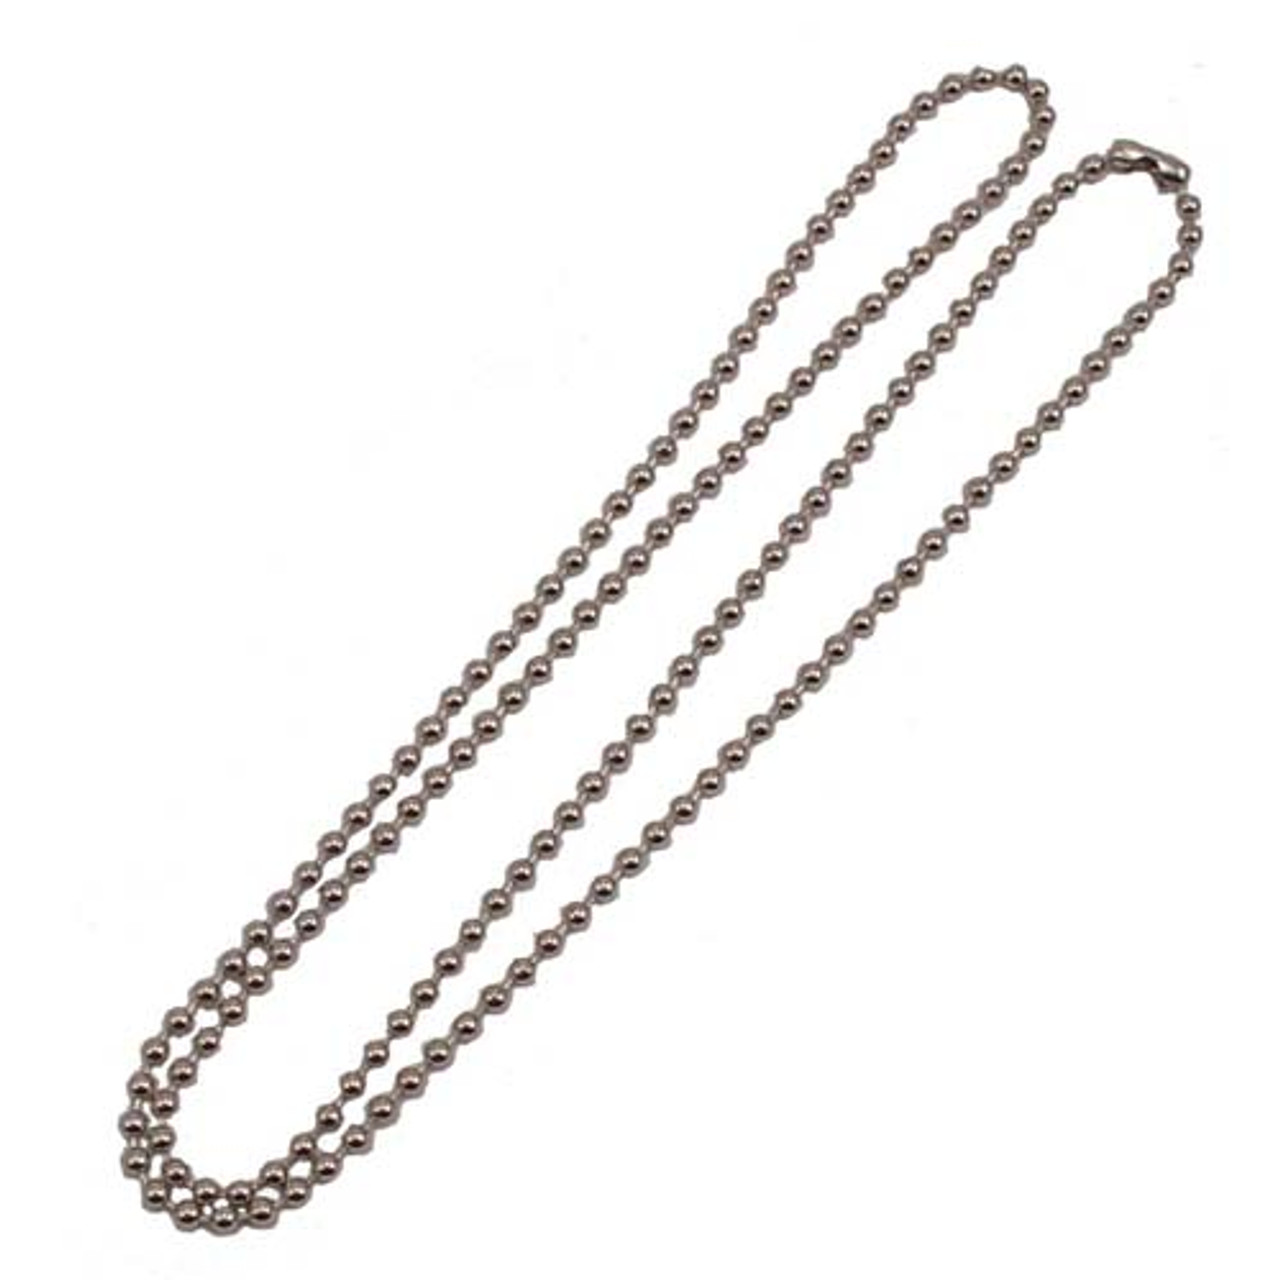 Shop for and Buy Beaded Neck Chain Key Holder - Thickest #10 - 30 Inches at  . Large selection and bulk discounts available.